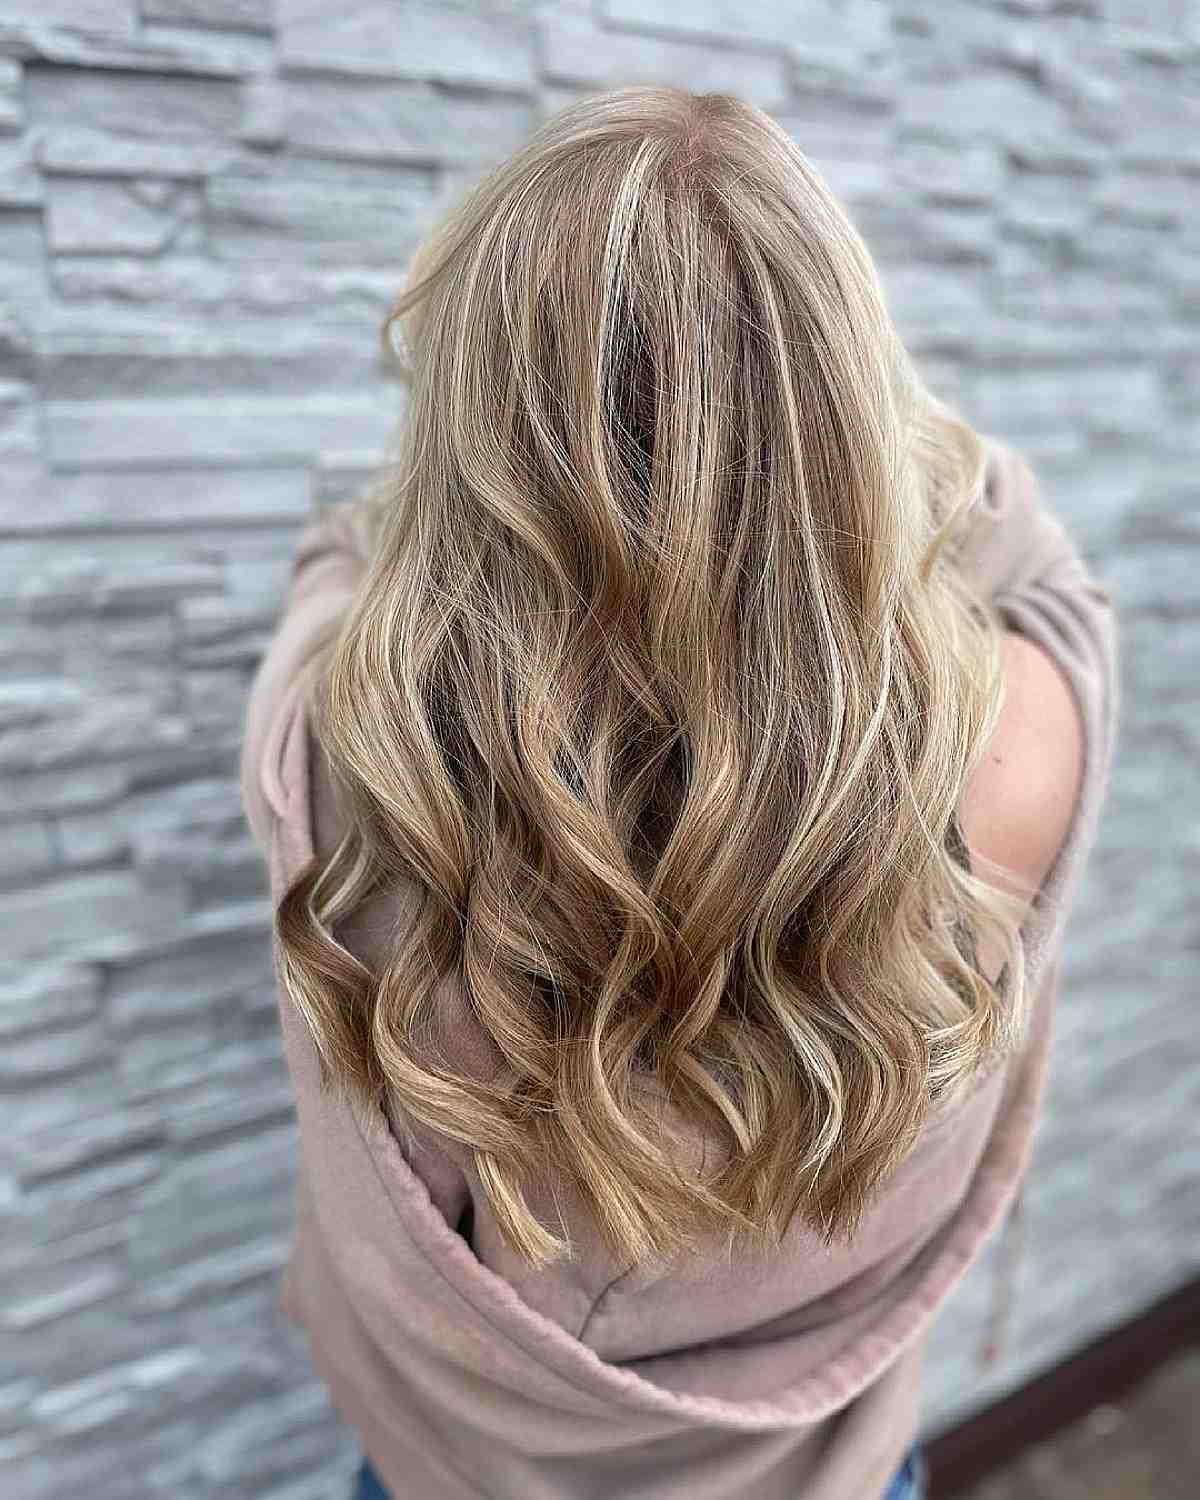 Summertime Buttery Blonde Highlights and Lowlights